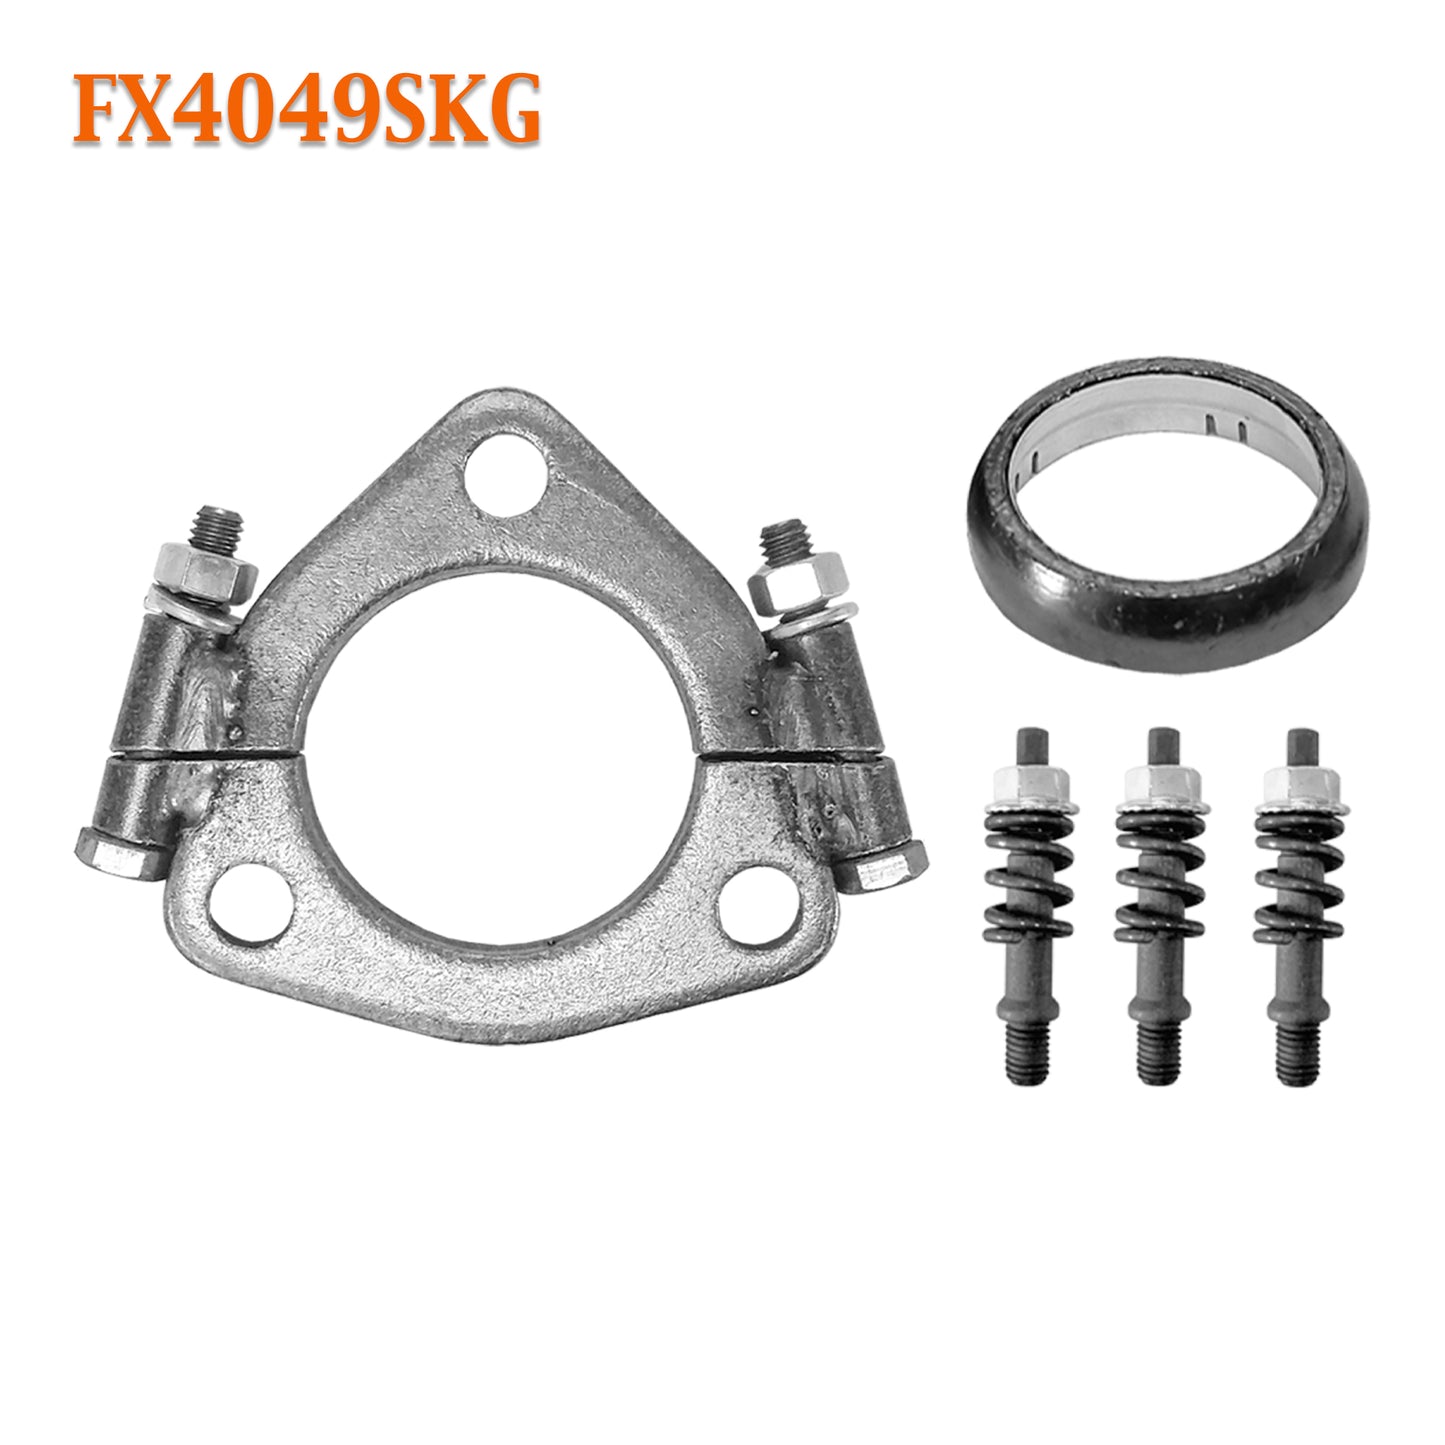 FX4049SKG 2 1/4" ID Triangle Exhaust Split Flange Kit For 2" OD Flared Y Pipe